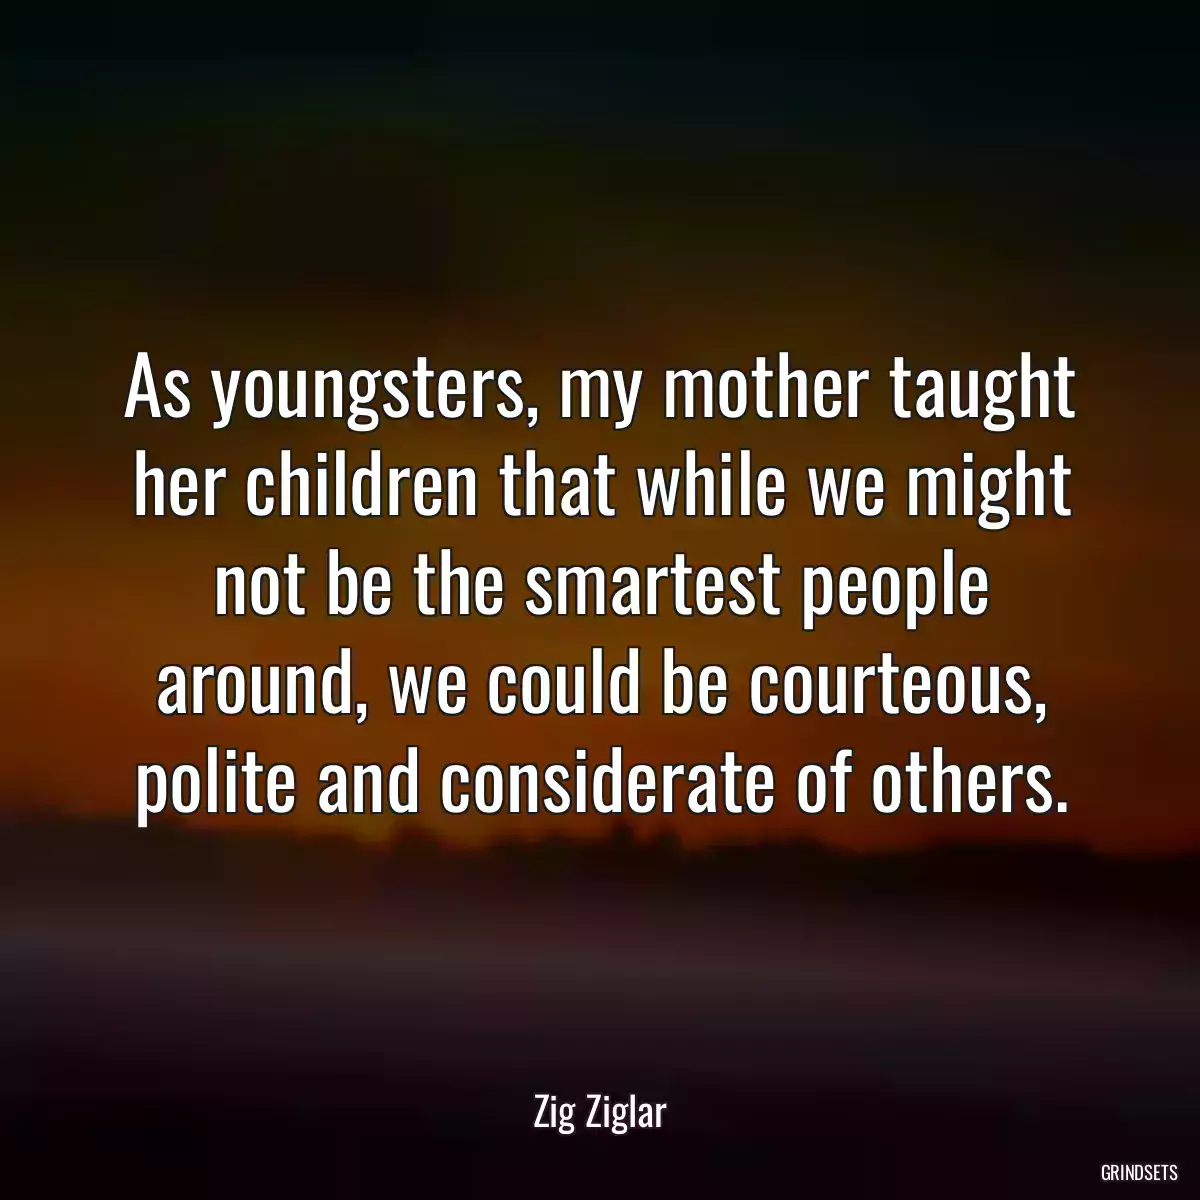 As youngsters, my mother taught her children that while we might not be the smartest people around, we could be courteous, polite and considerate of others.